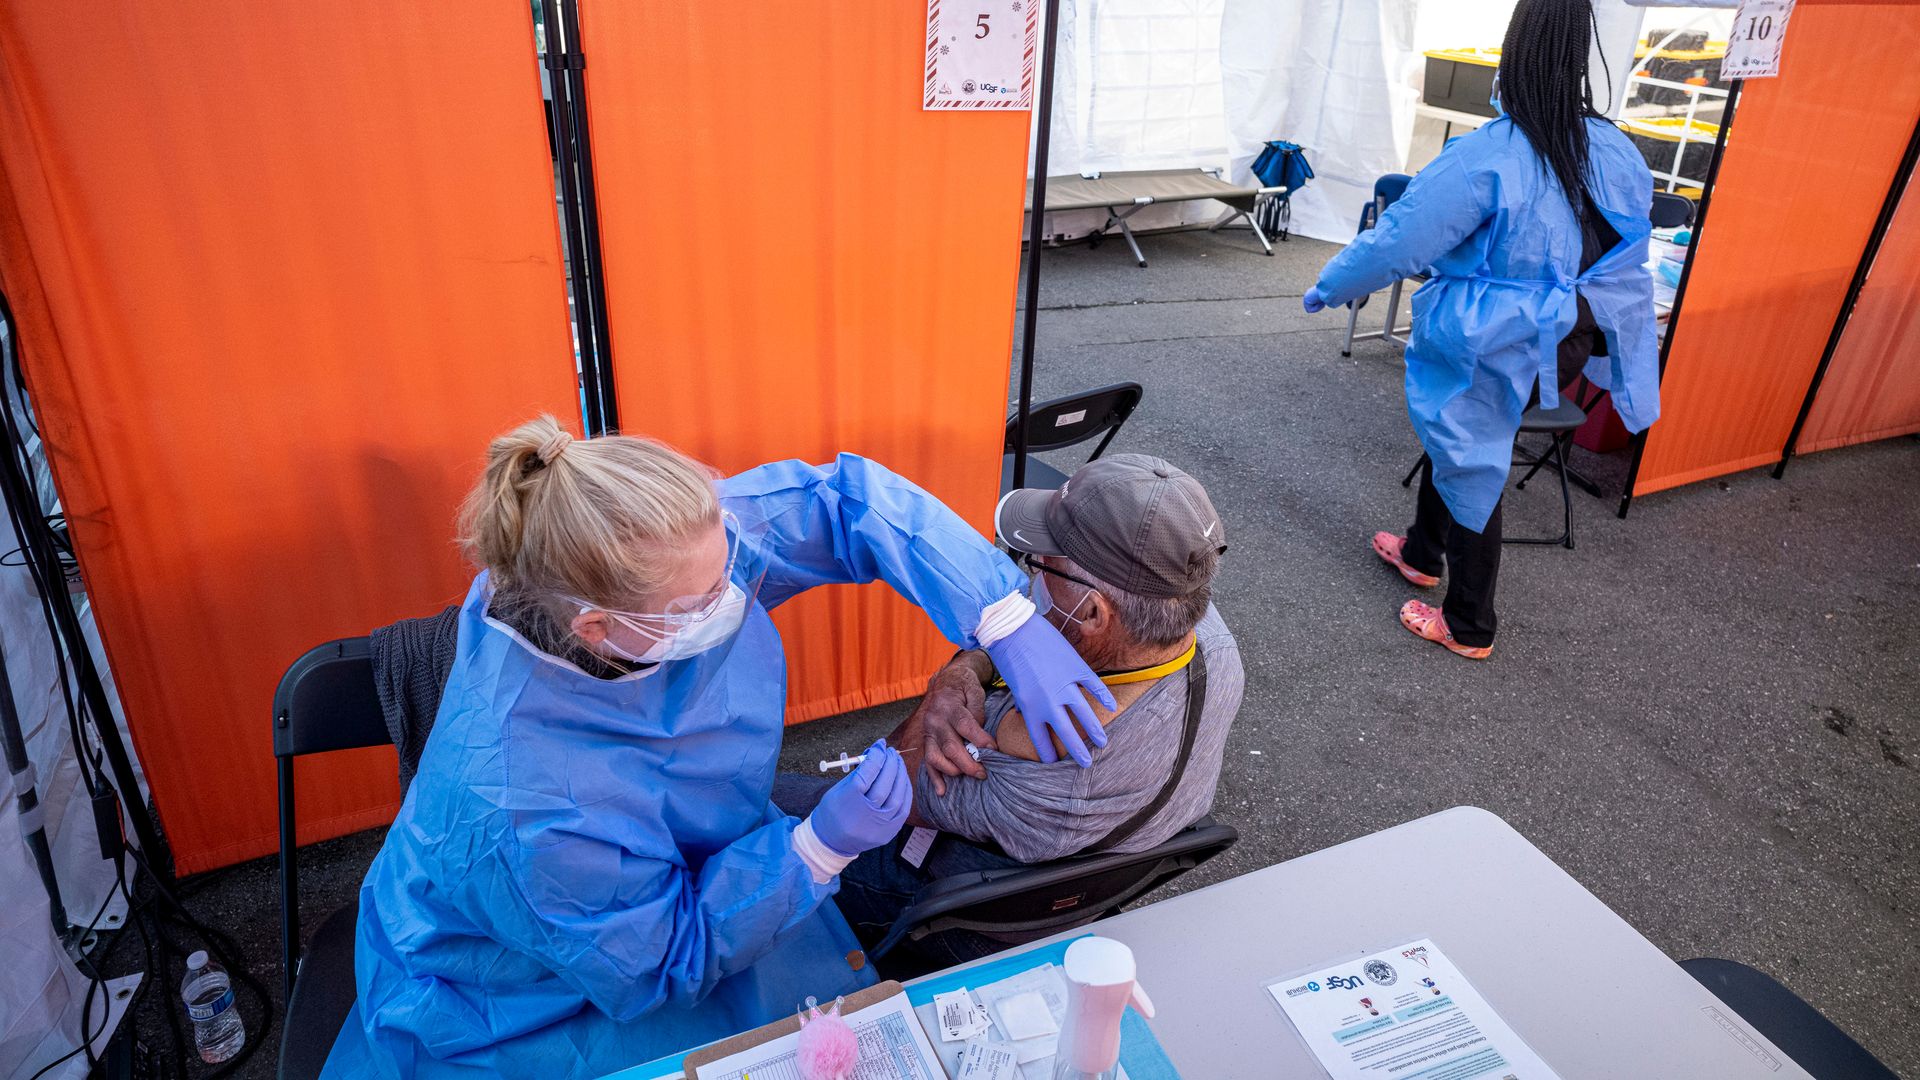 A healthcare worker administers a Pfizer-BioNTech Covid-19 vaccine at a vaccination site in San Francisco, California, U.S., on Monday, Jan. 10, 2022.